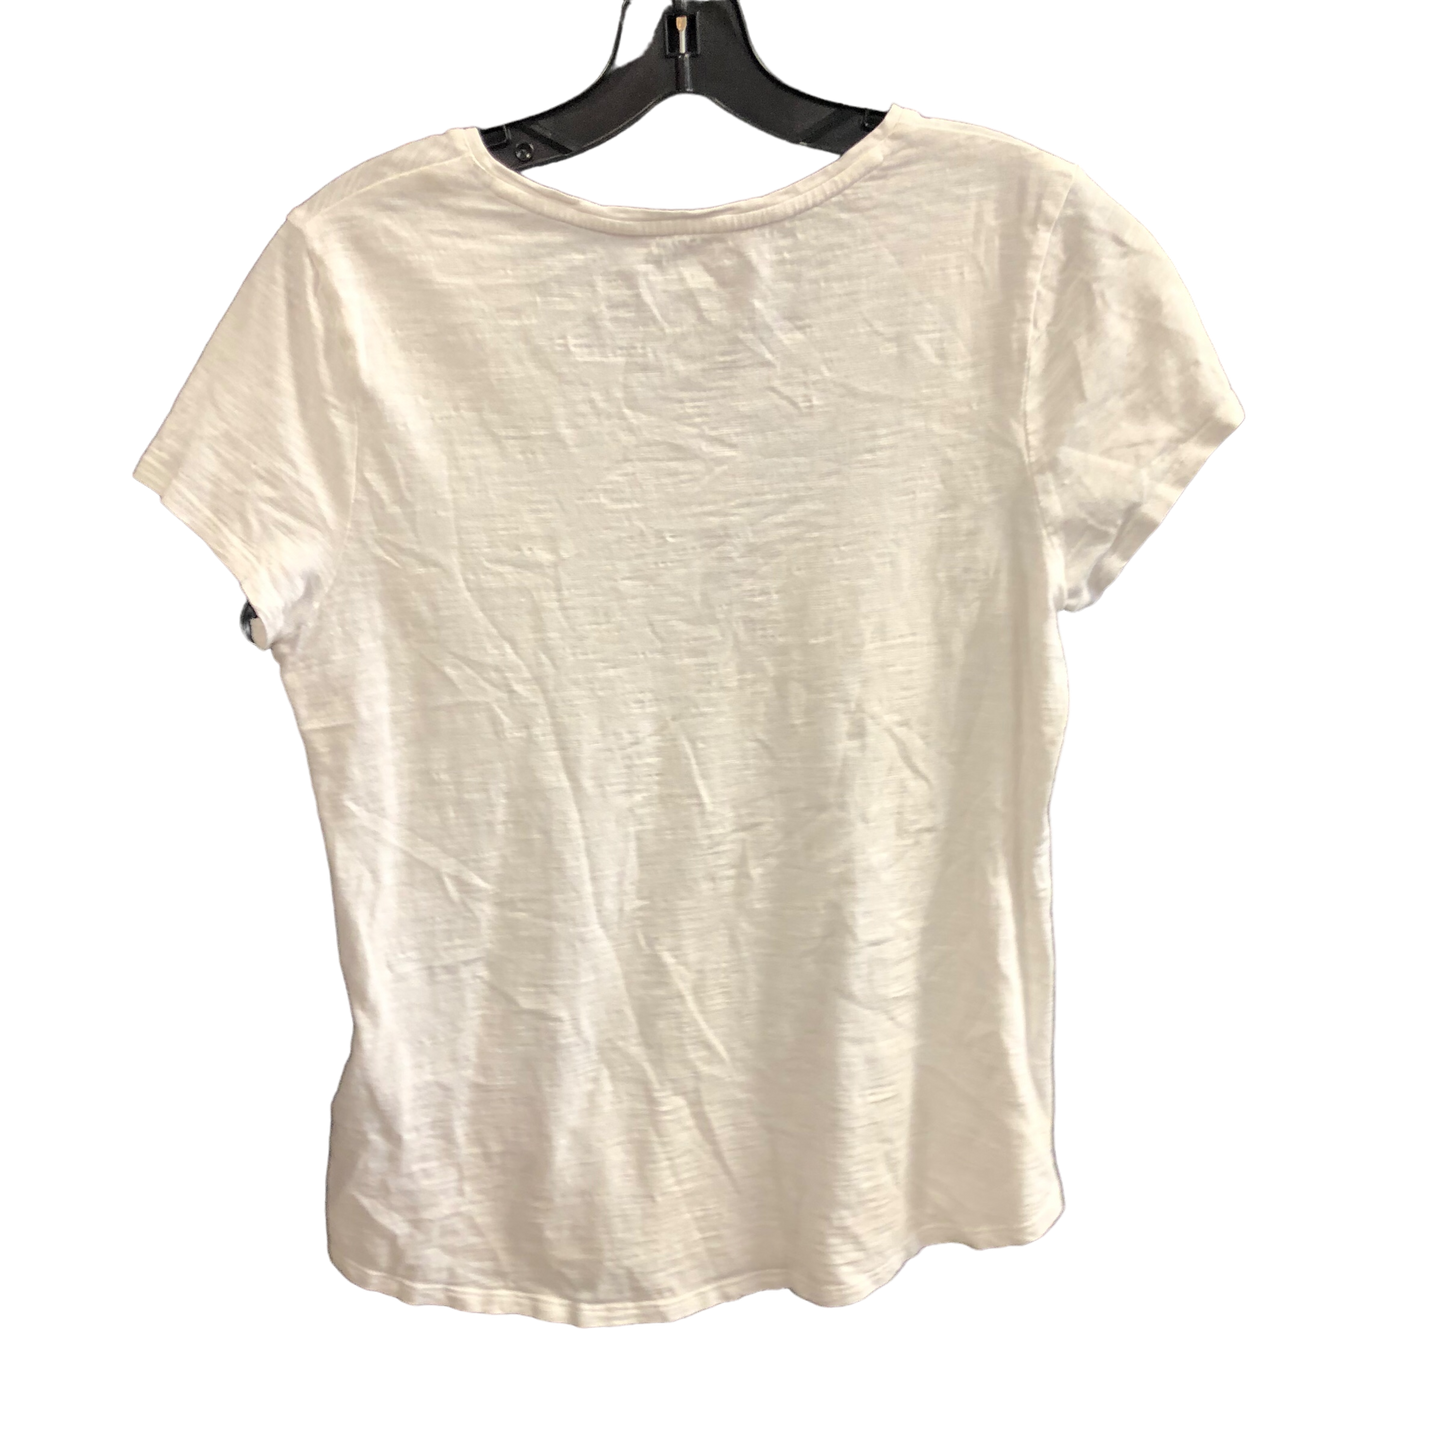 White Top Short Sleeve Chicos, Size S